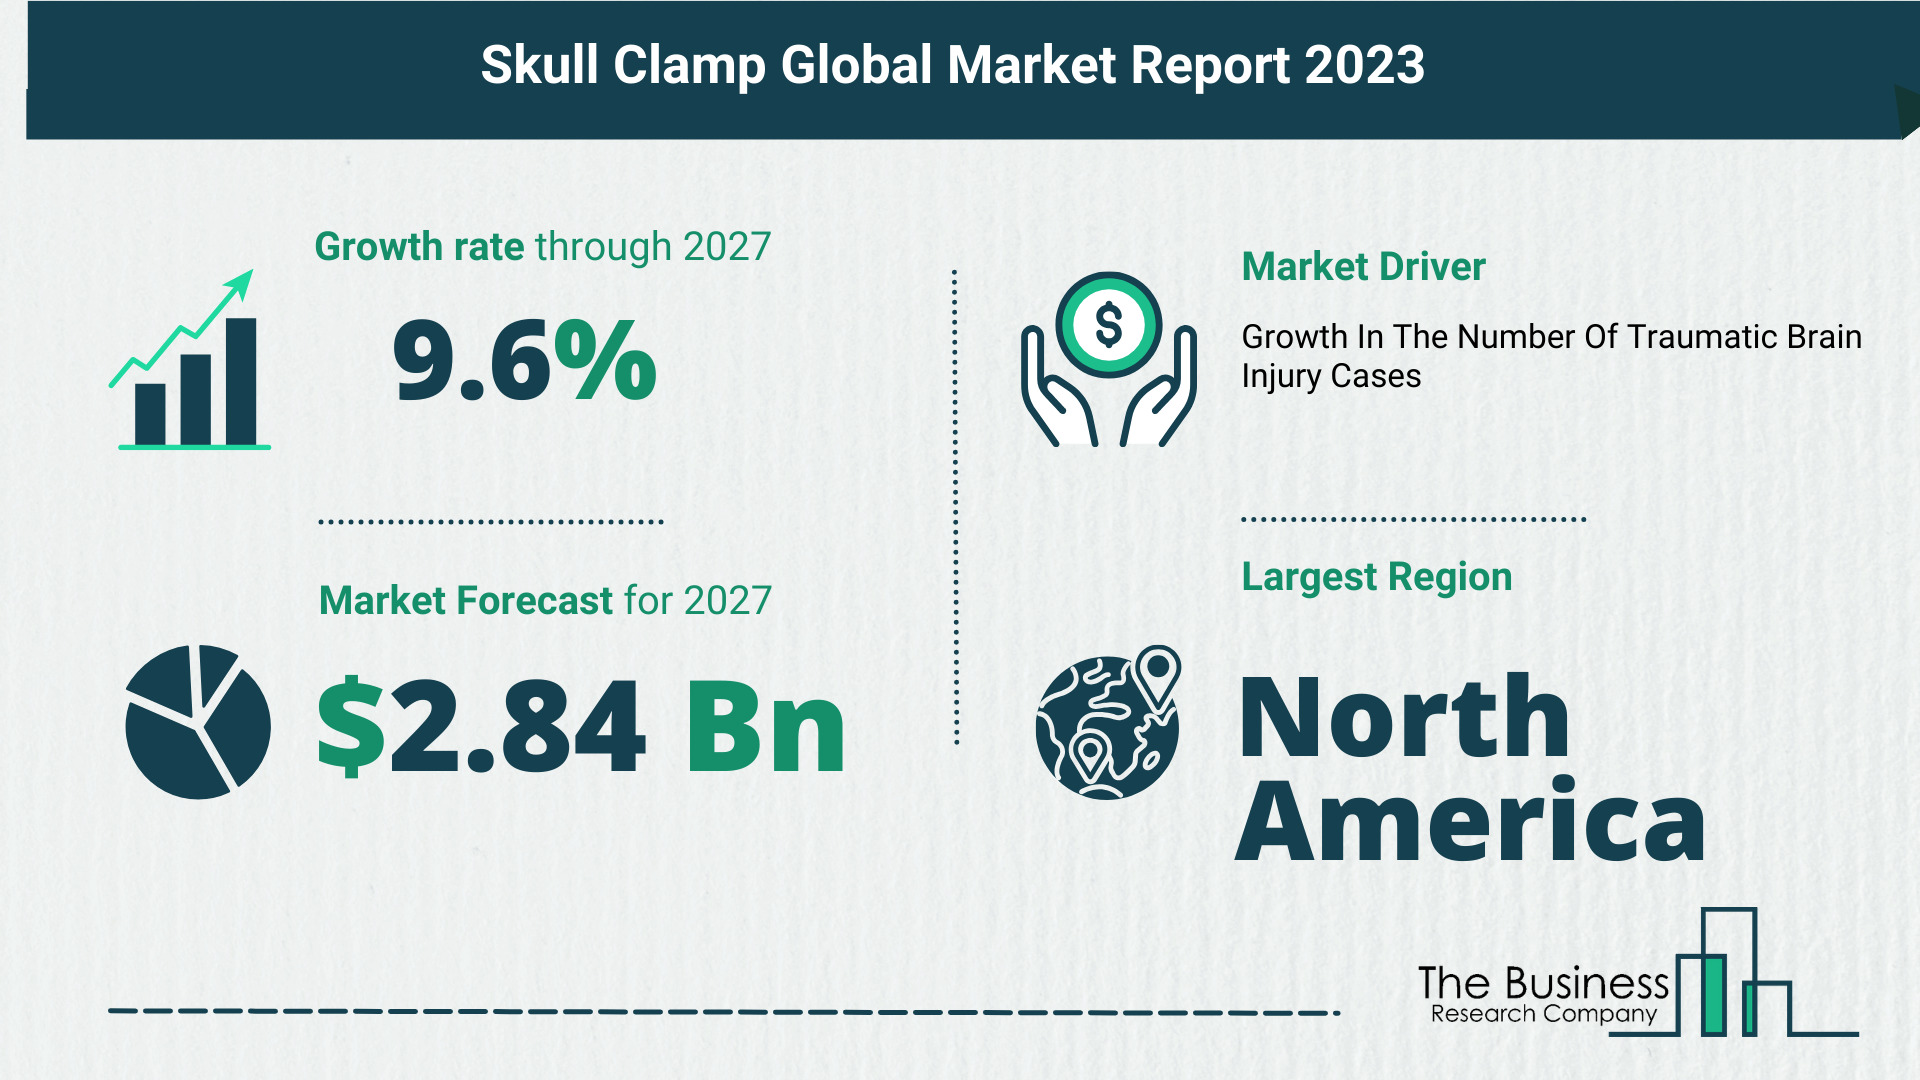 Key Trends And Drivers In The Skull Clamp Market 2023